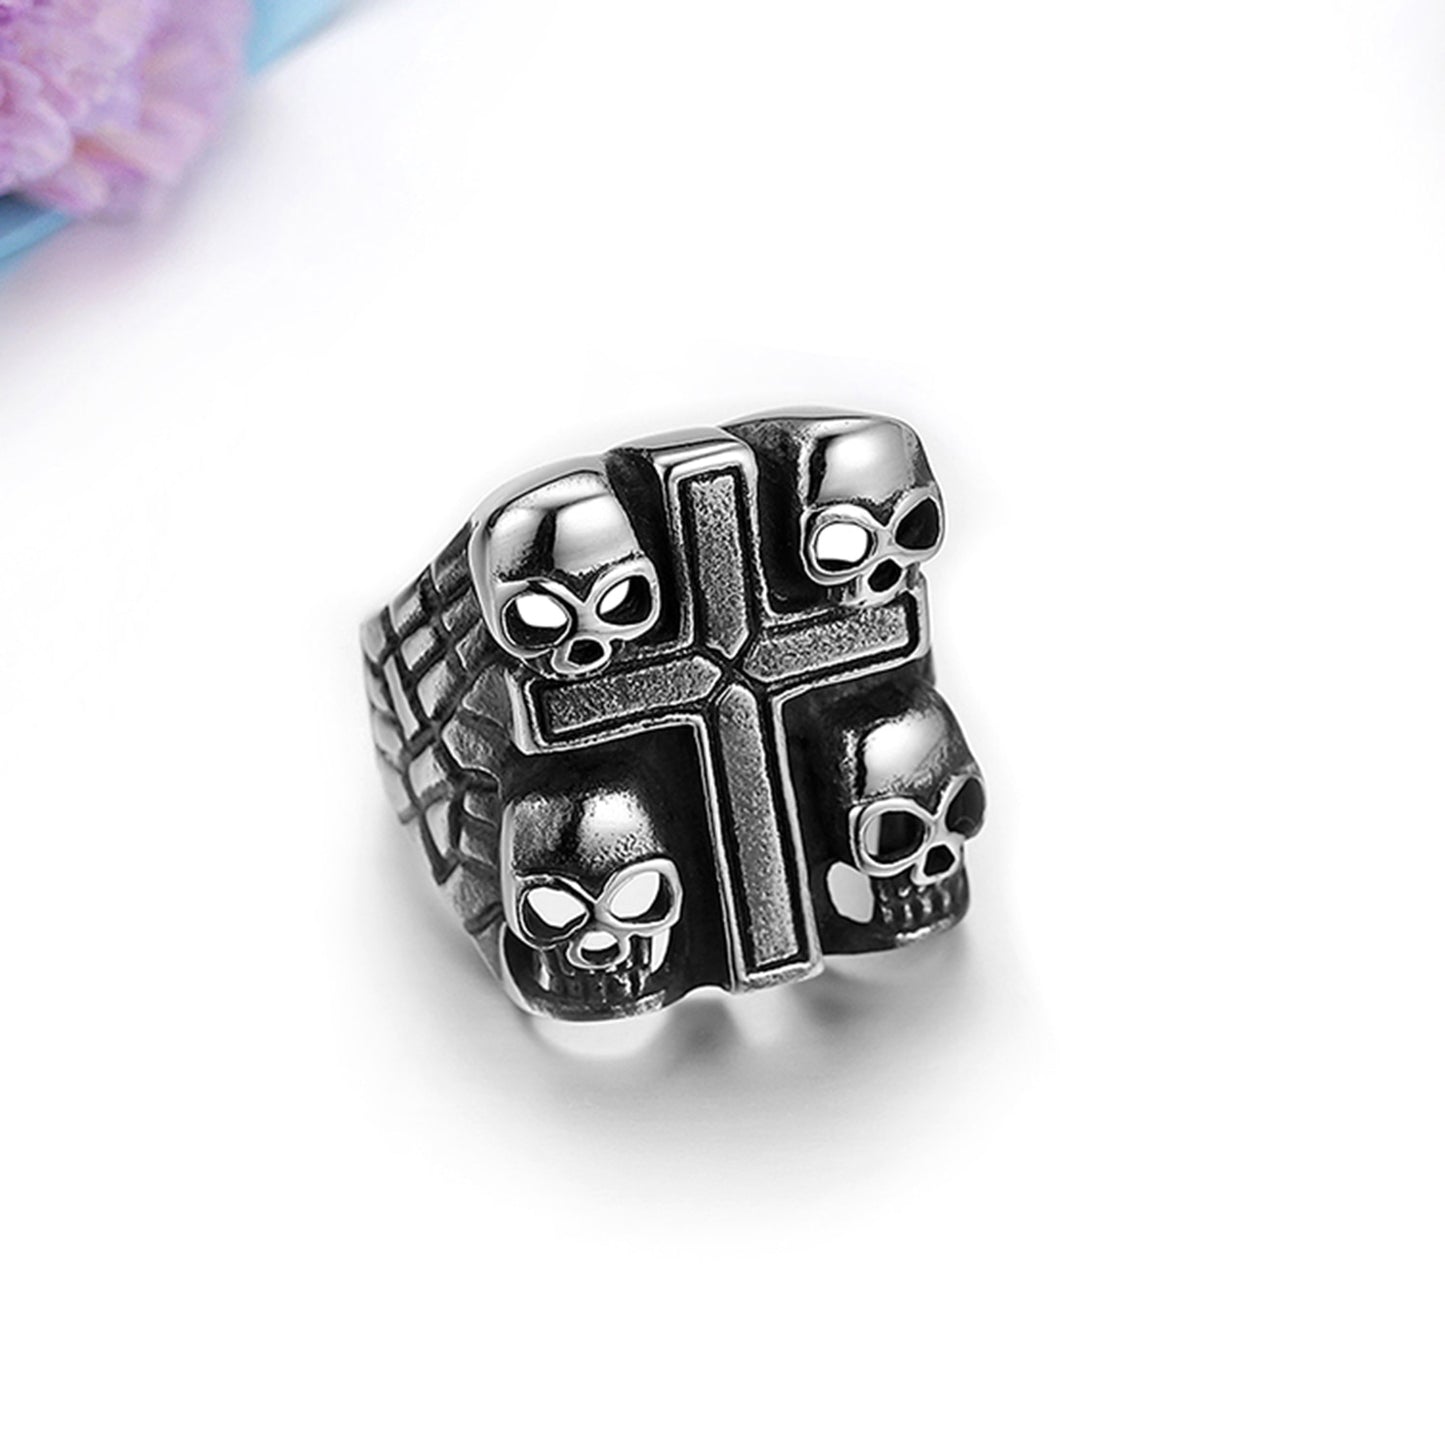 Skull Ring / Gothic Jewelry / Punk Style